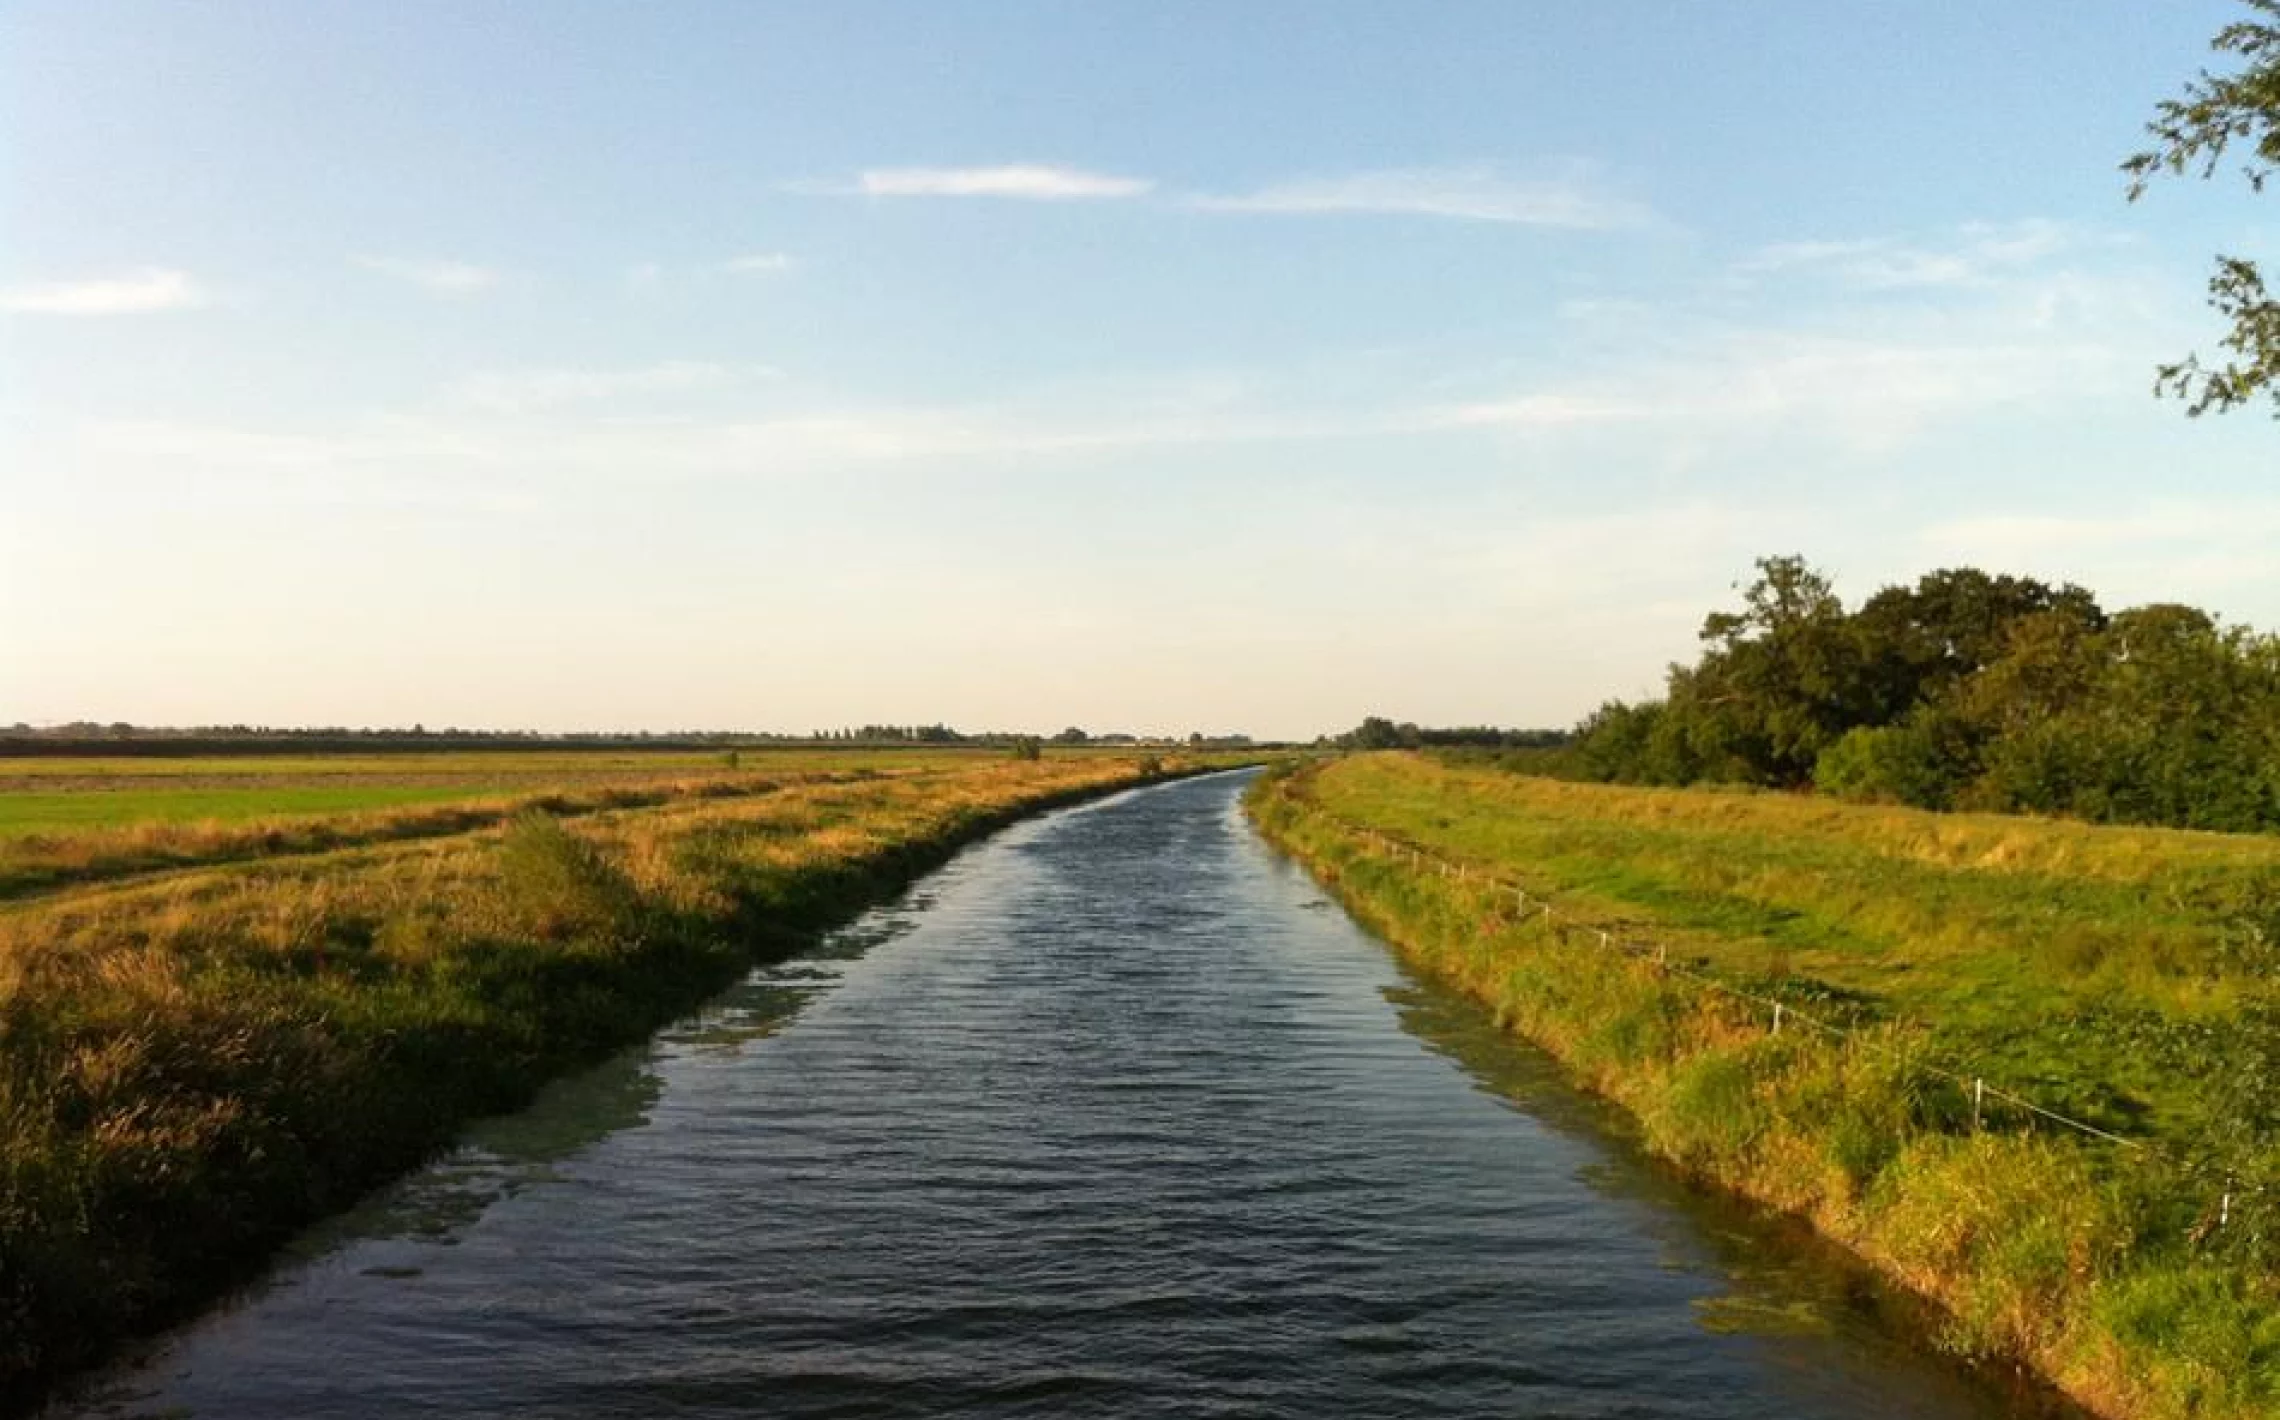 Looking south along the New Bedford river at Sutton Gault in the Cambridgeshire fens